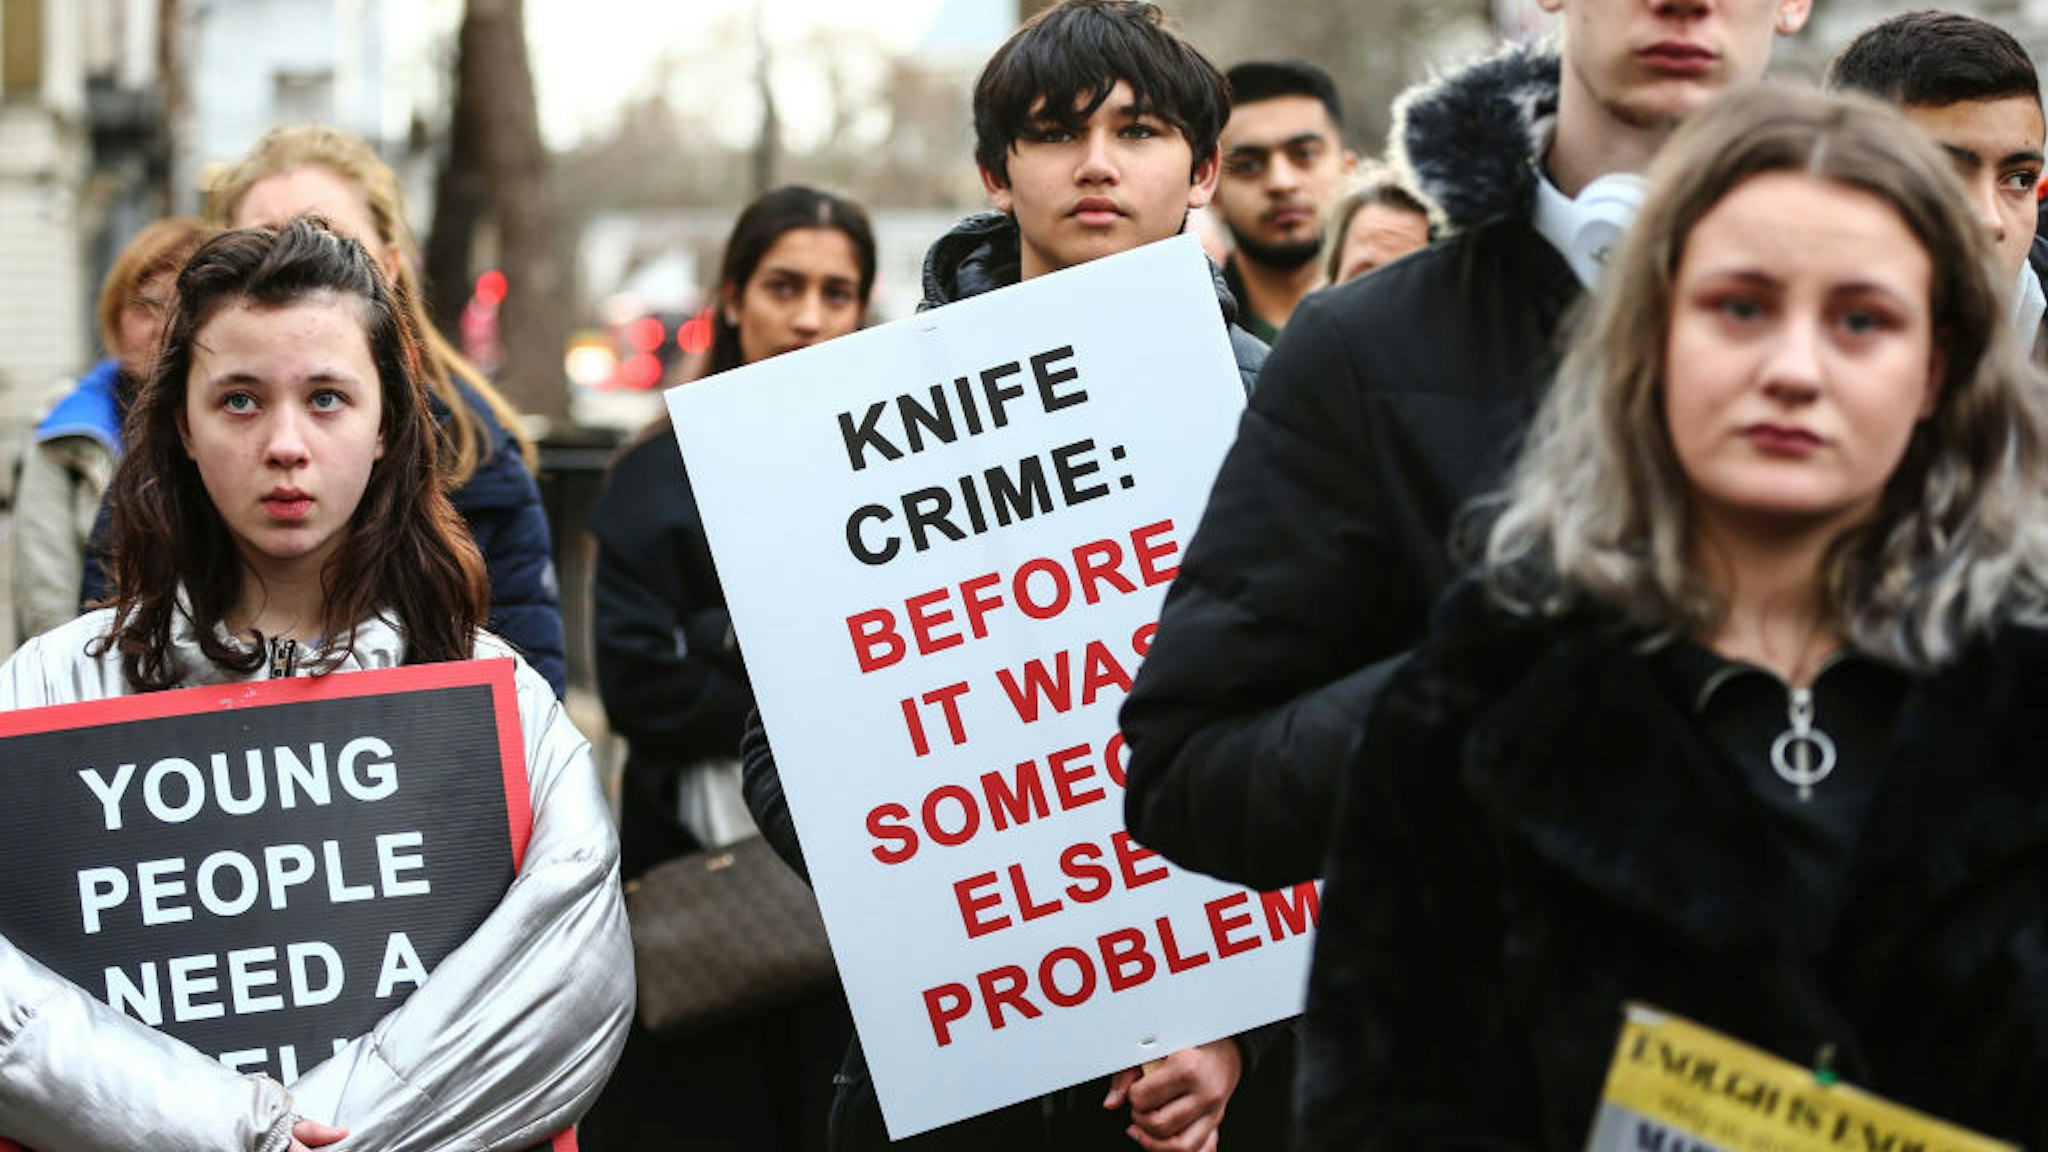 Protestors participate in A March To Stop Knife Crime by The Tashan Daniel Campaign on December 7, 2019 in London, England.